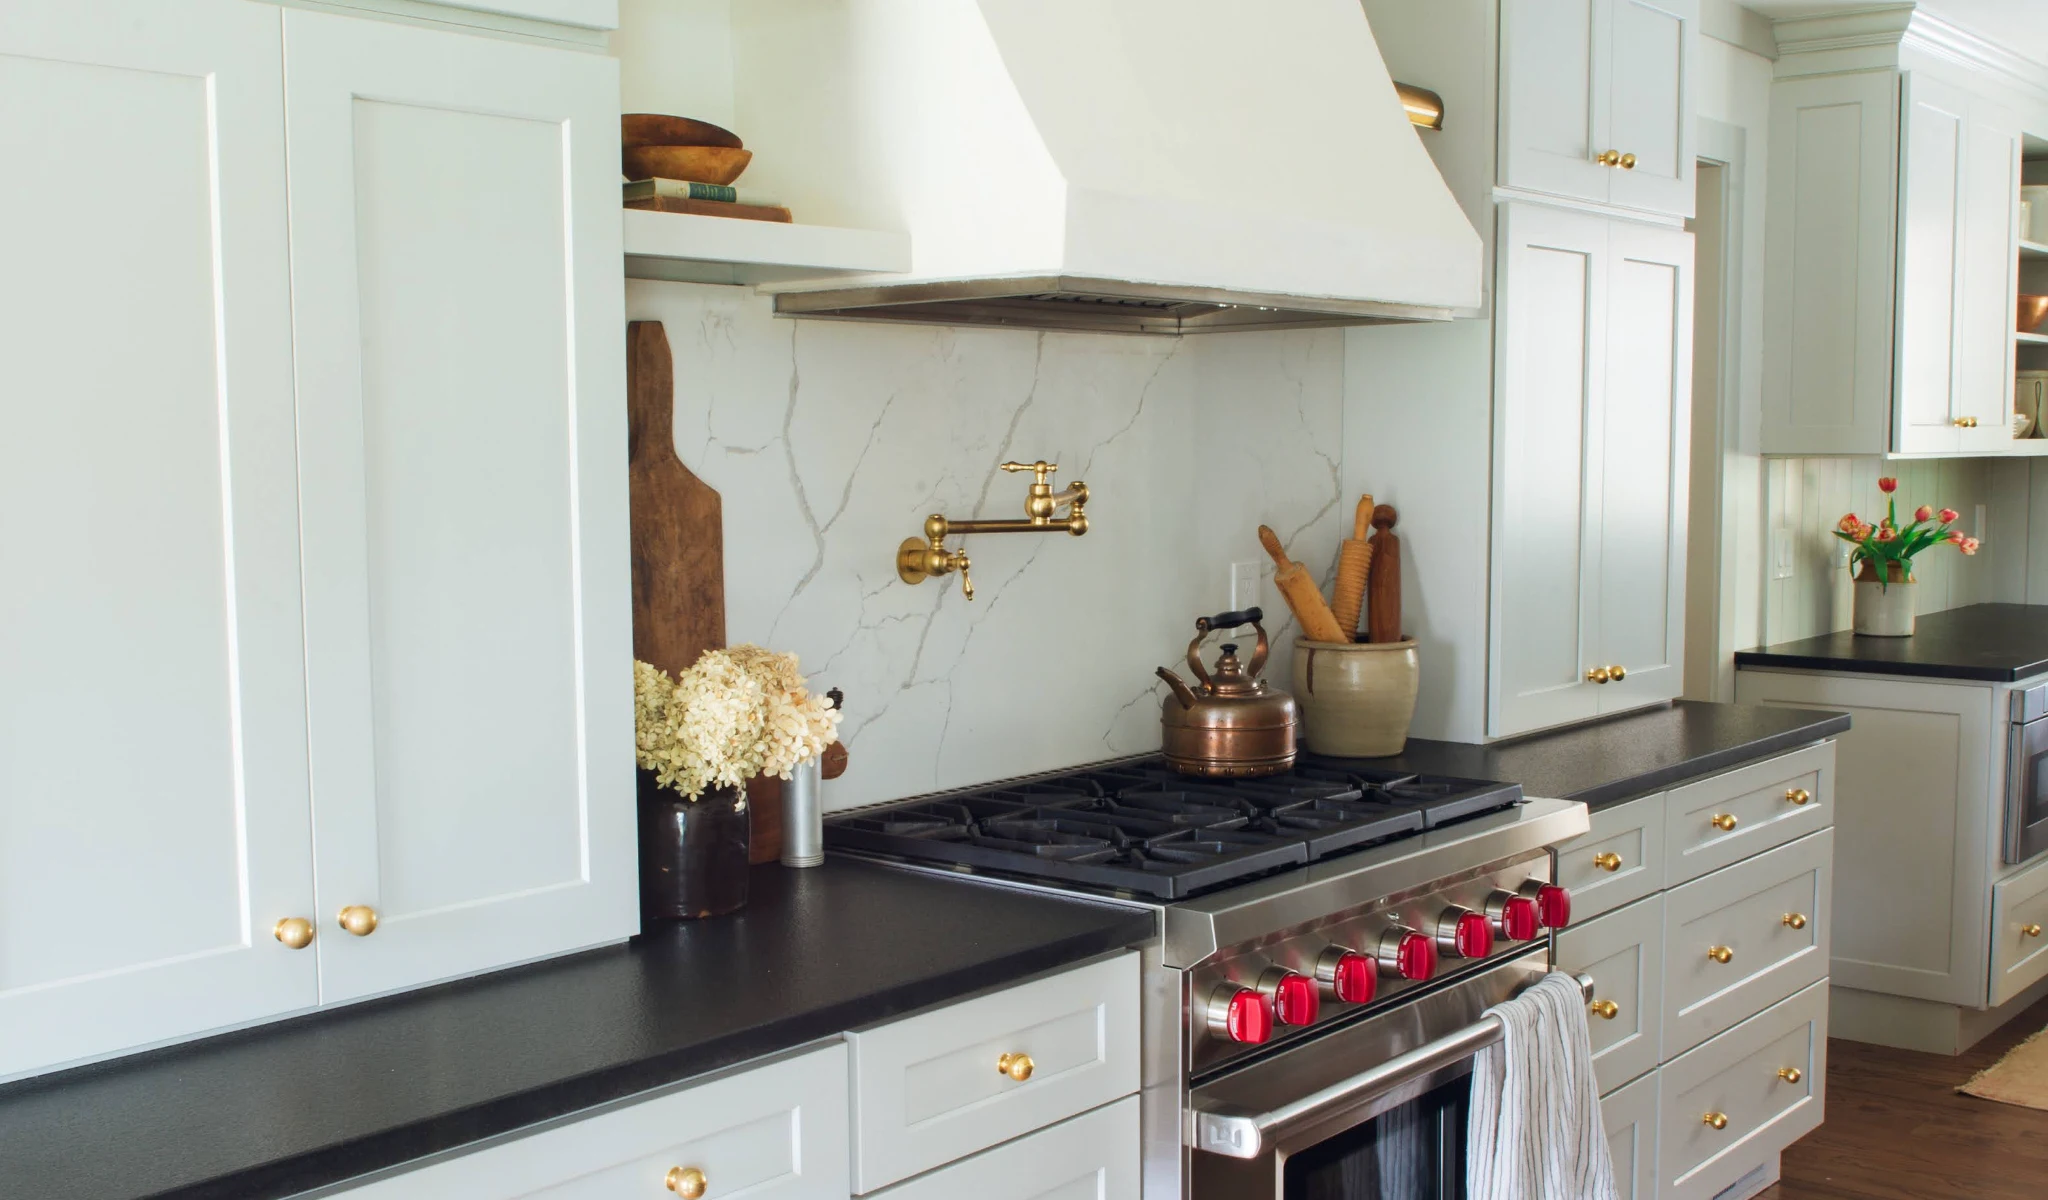 A kitchen with white cabinets, a new stove, and gold accents.